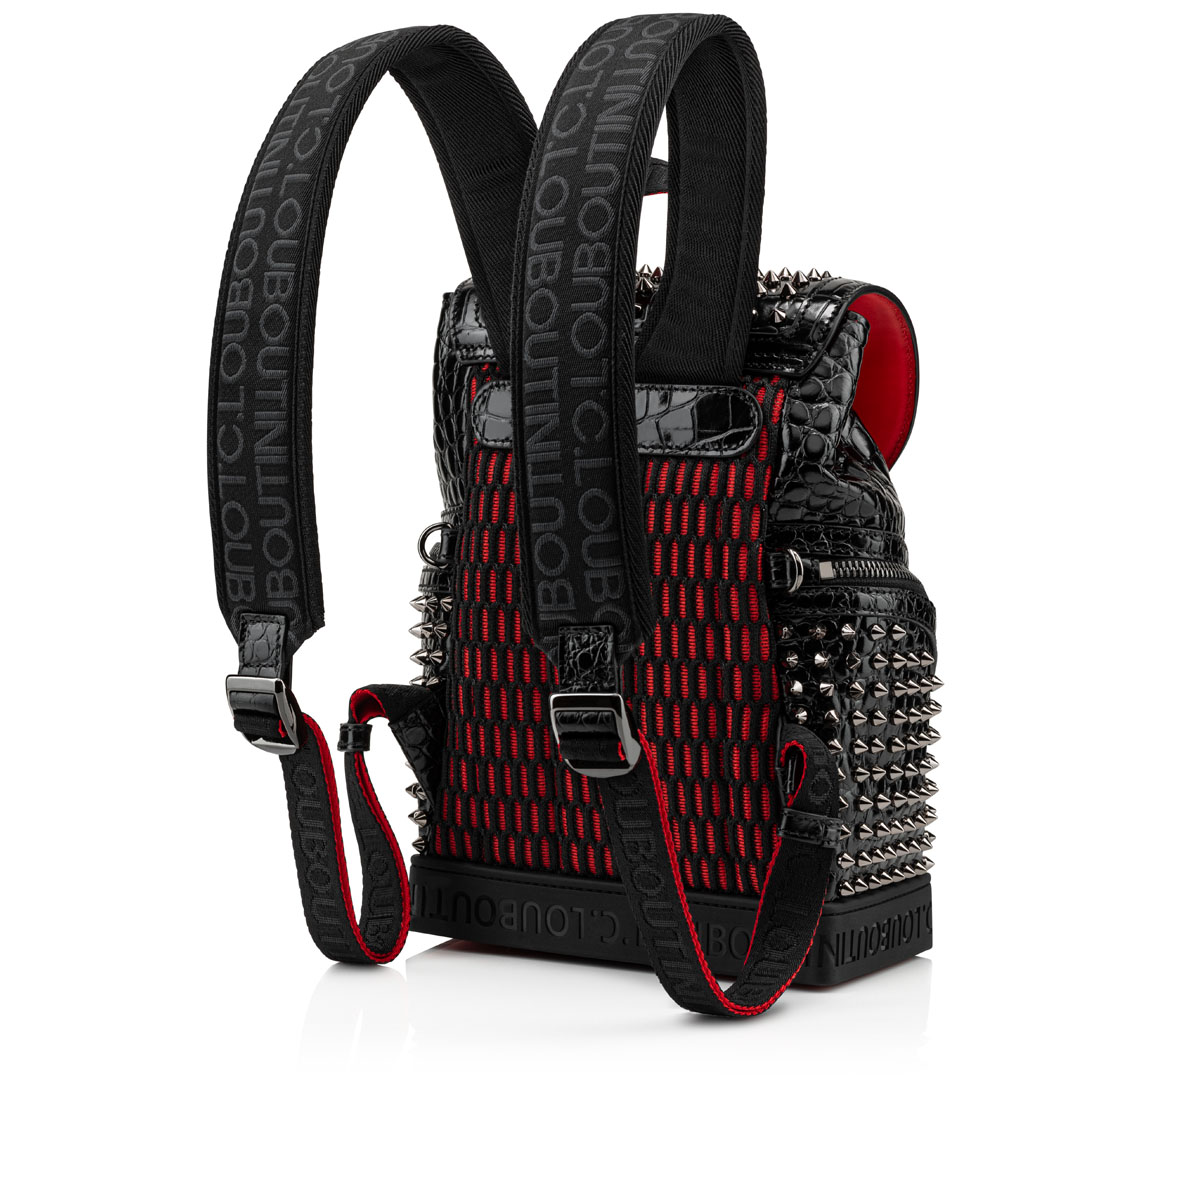 Explorafunk - Backpack - Grained calf leather - Black - Christian Louboutin